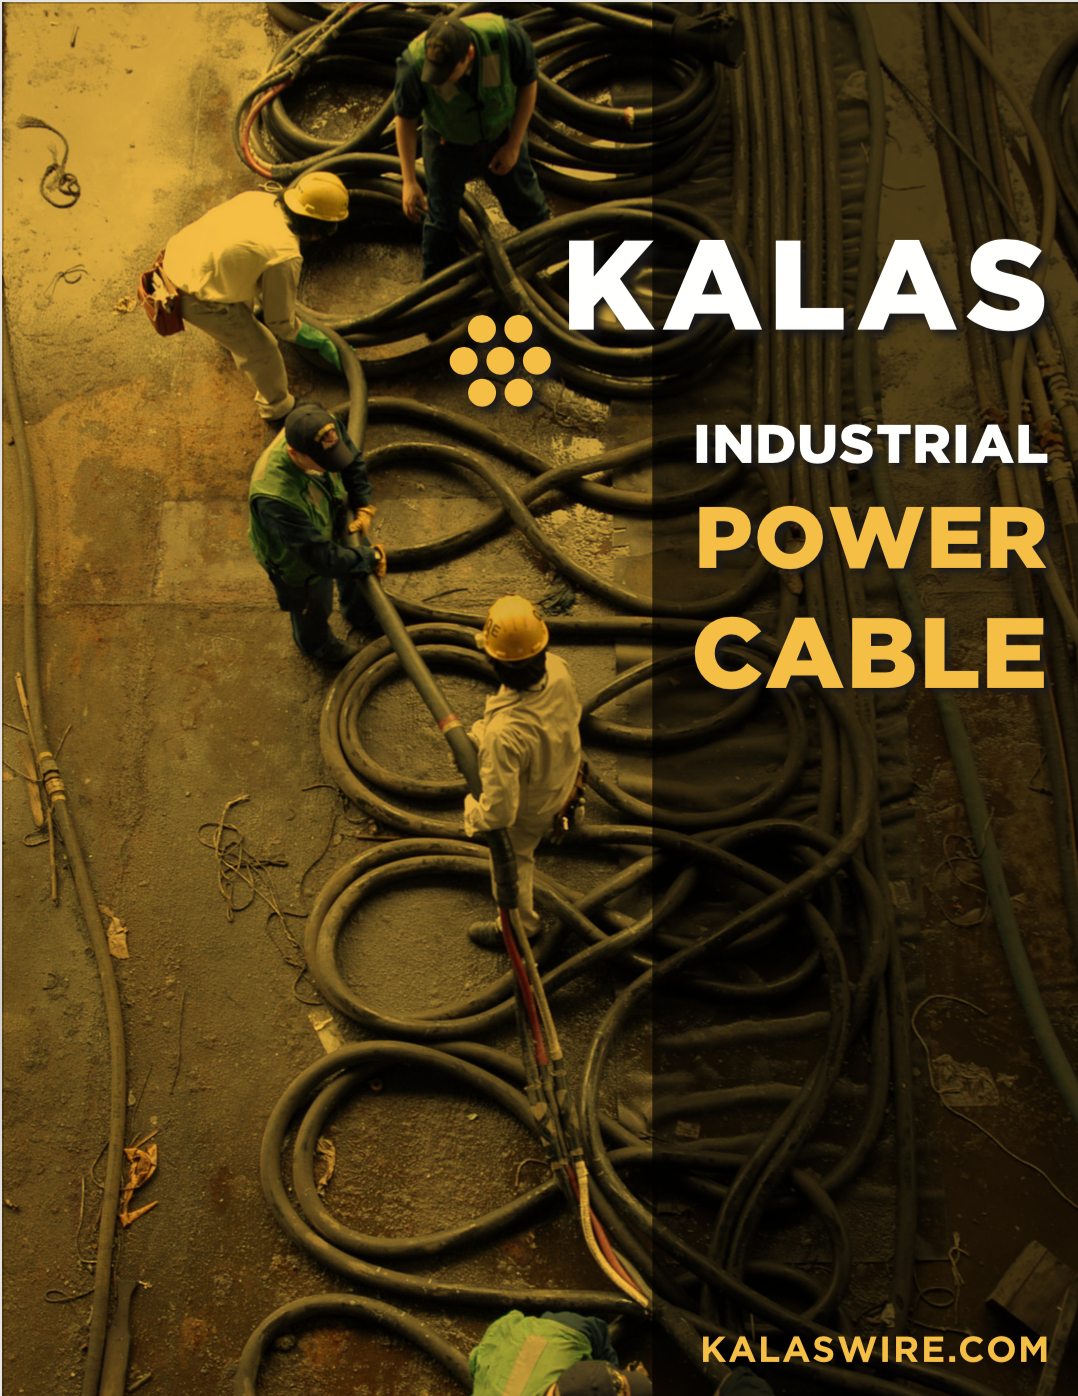 Kalas Industrial Power Cable Type W Type PPE and More Catalog